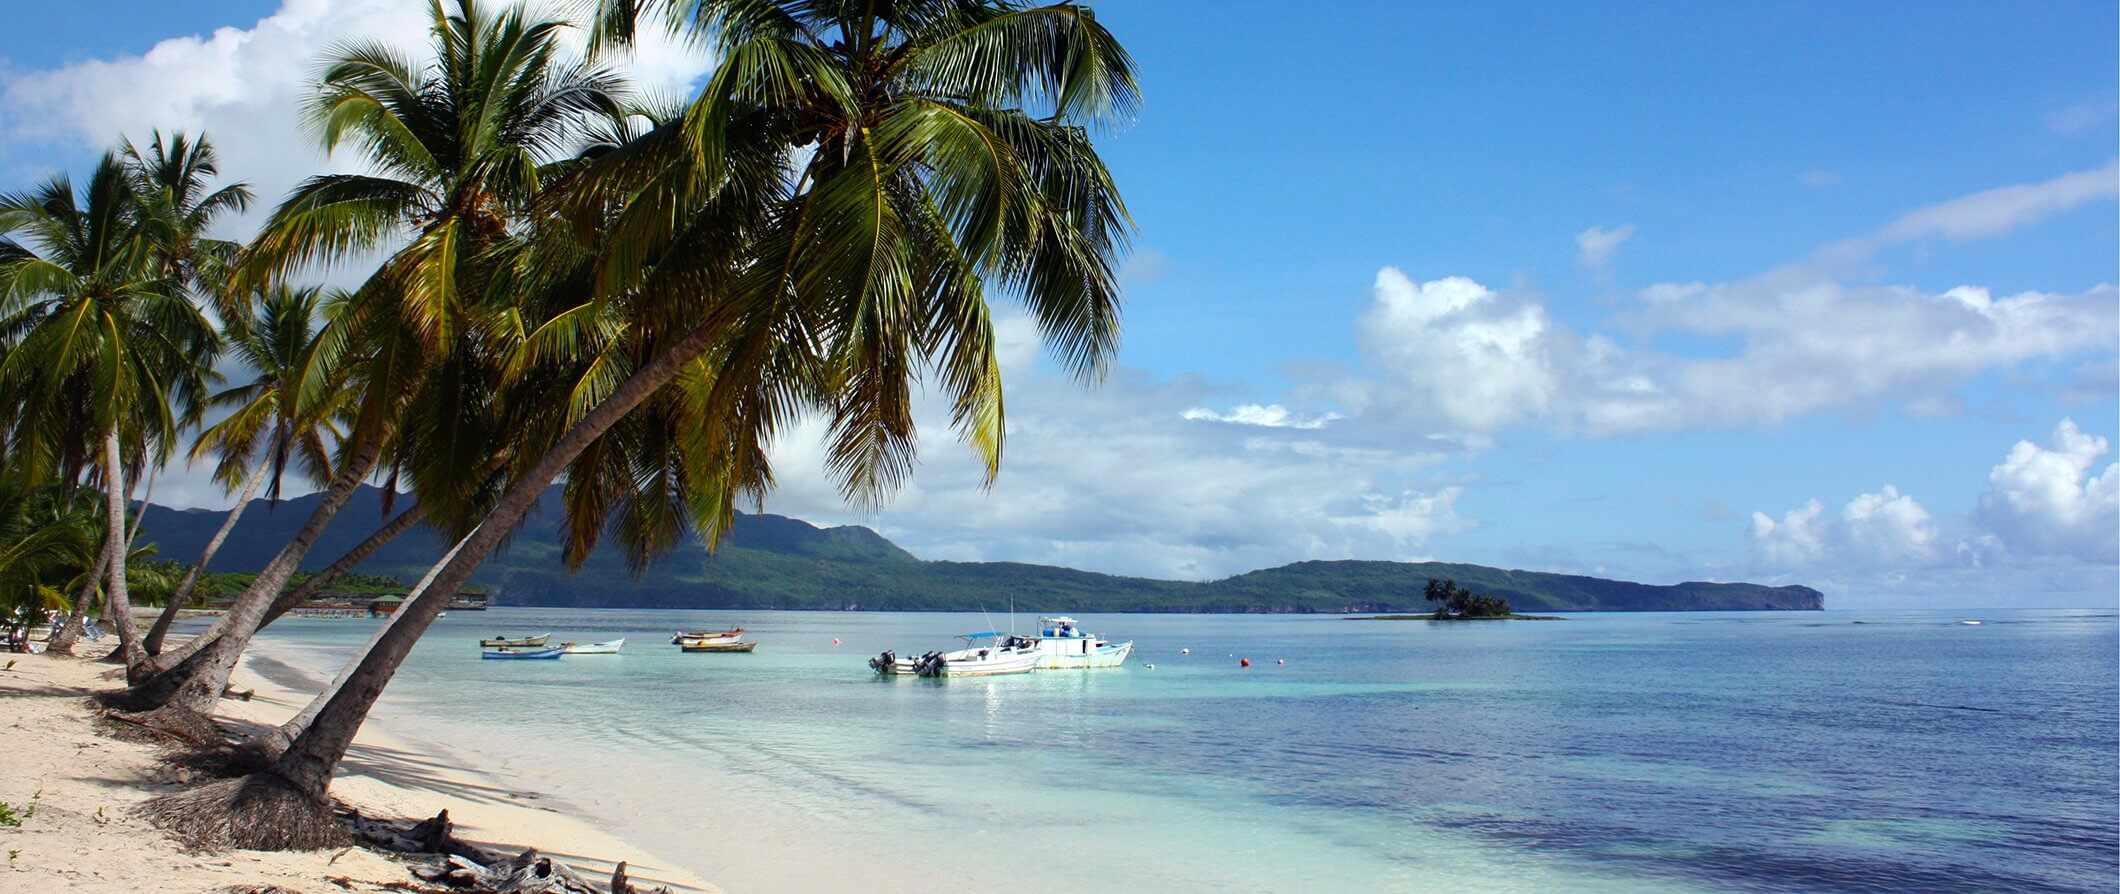 a beach in the Caribbean - Palm trees, sand, the sea and boats